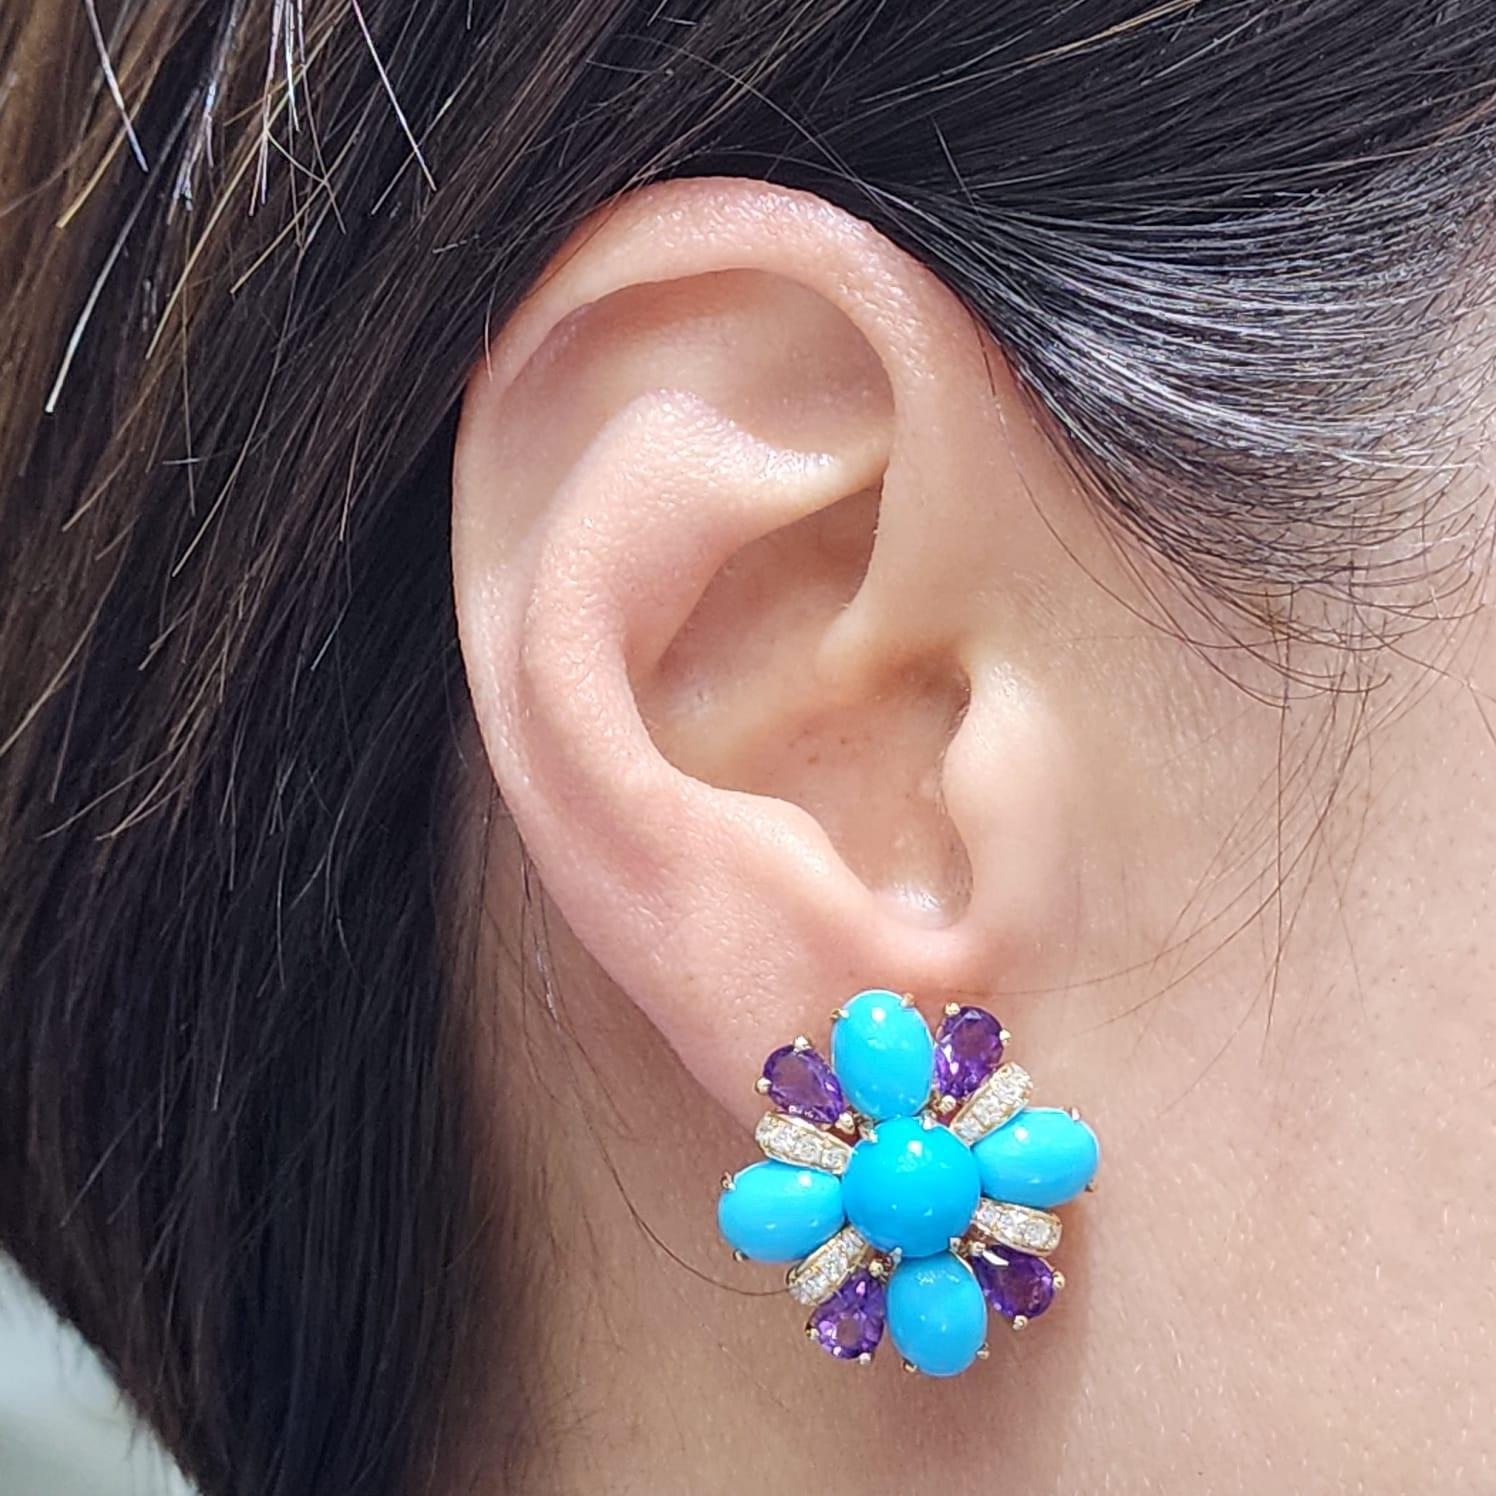 These vibrant earrings are a celebration of color and elegance. Adorned with 0.41 carats of diamonds, 3.72 carats of round turquoise, and 8.48 carats of oval turquoise, the earrings radiate with the serene blue of the ocean. These calming blues are